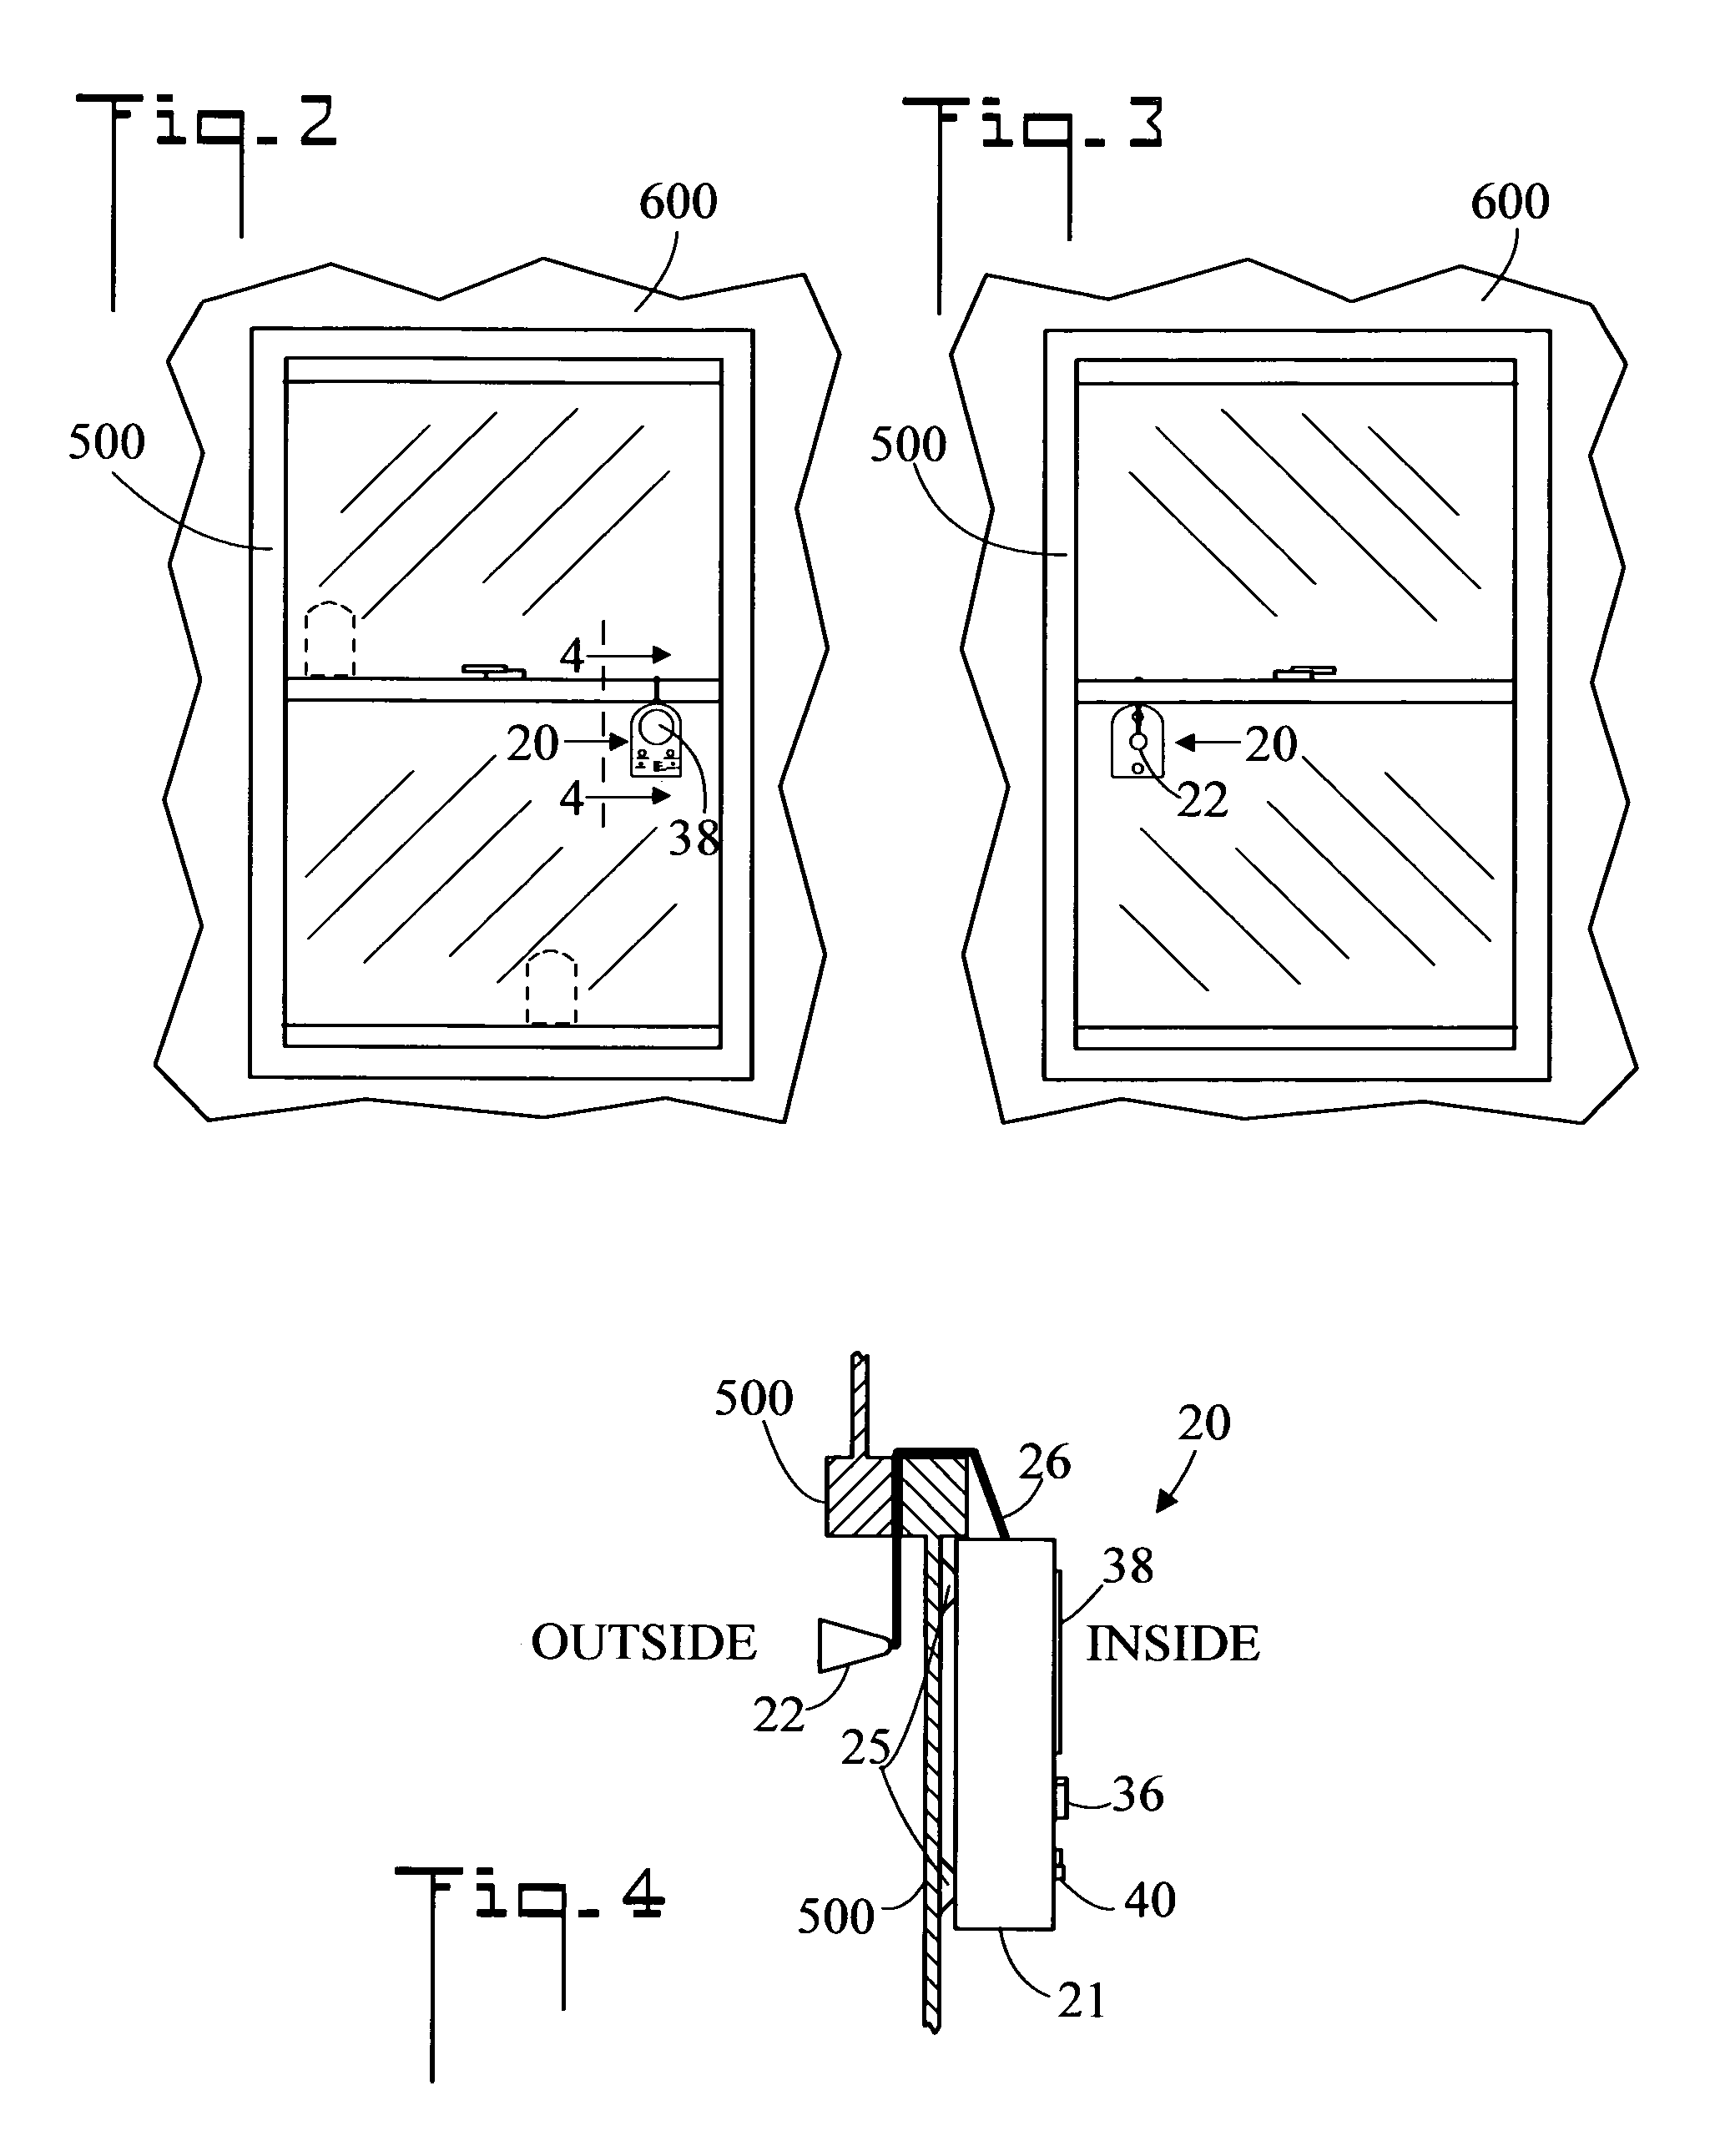 Method for monitoring outside sound through a closed window and device therefor